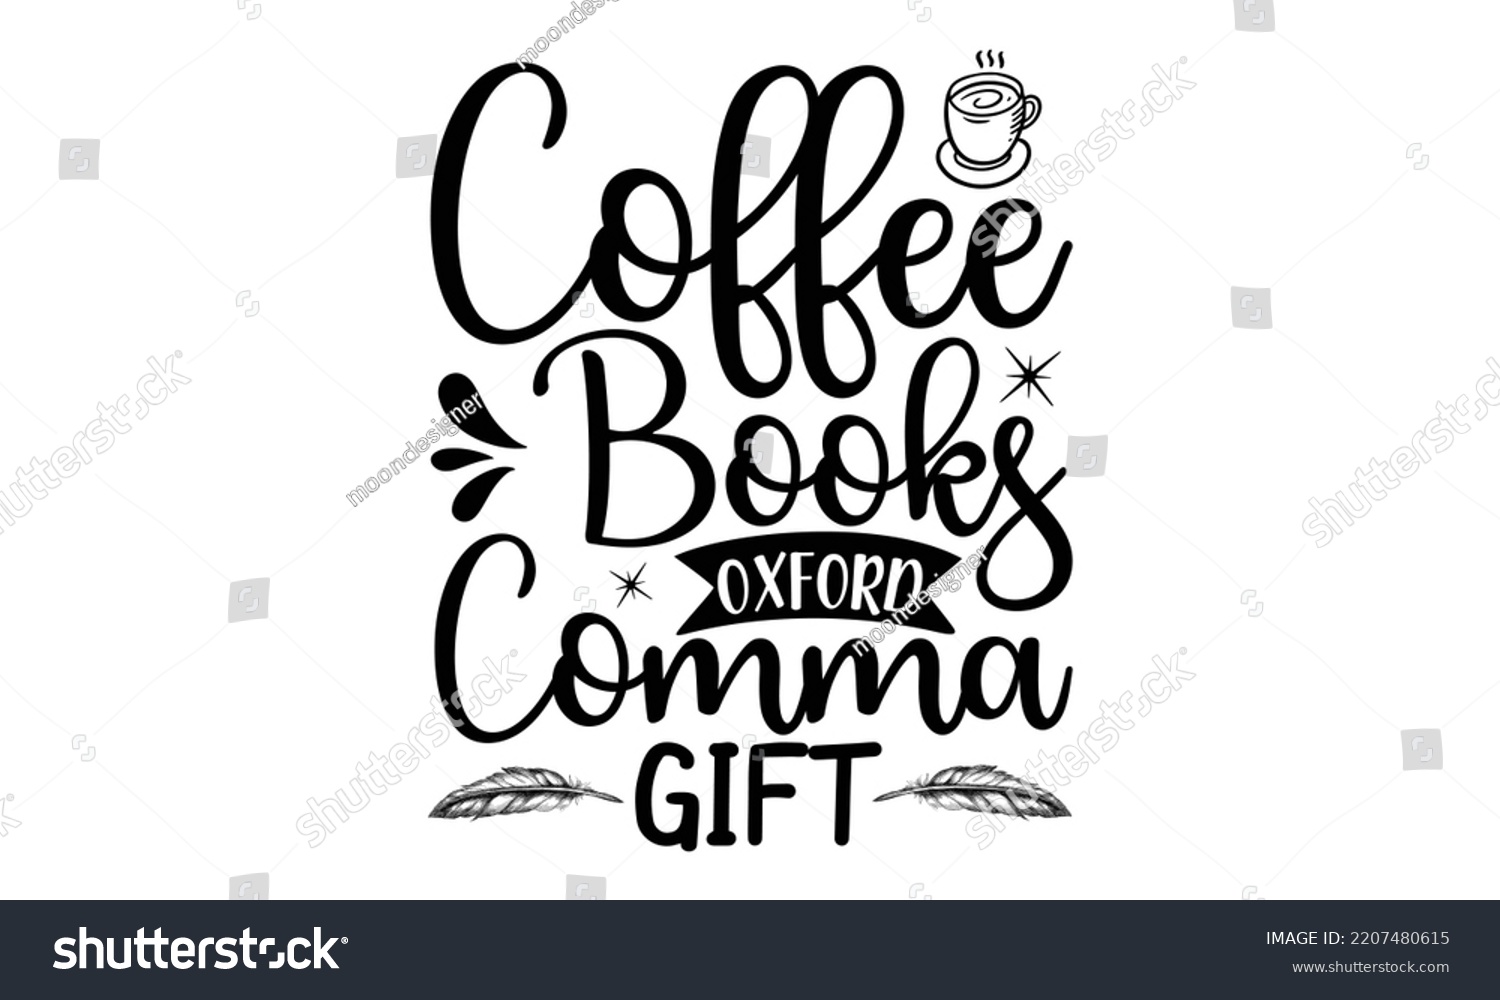 SVG of Coffee Books Oxford Comma Gift - writing t shirt design and svg Files, svg Files for Cutting and Silhouette, writing funny quote, Hand drawn lettering phrase, EPS 10 svg